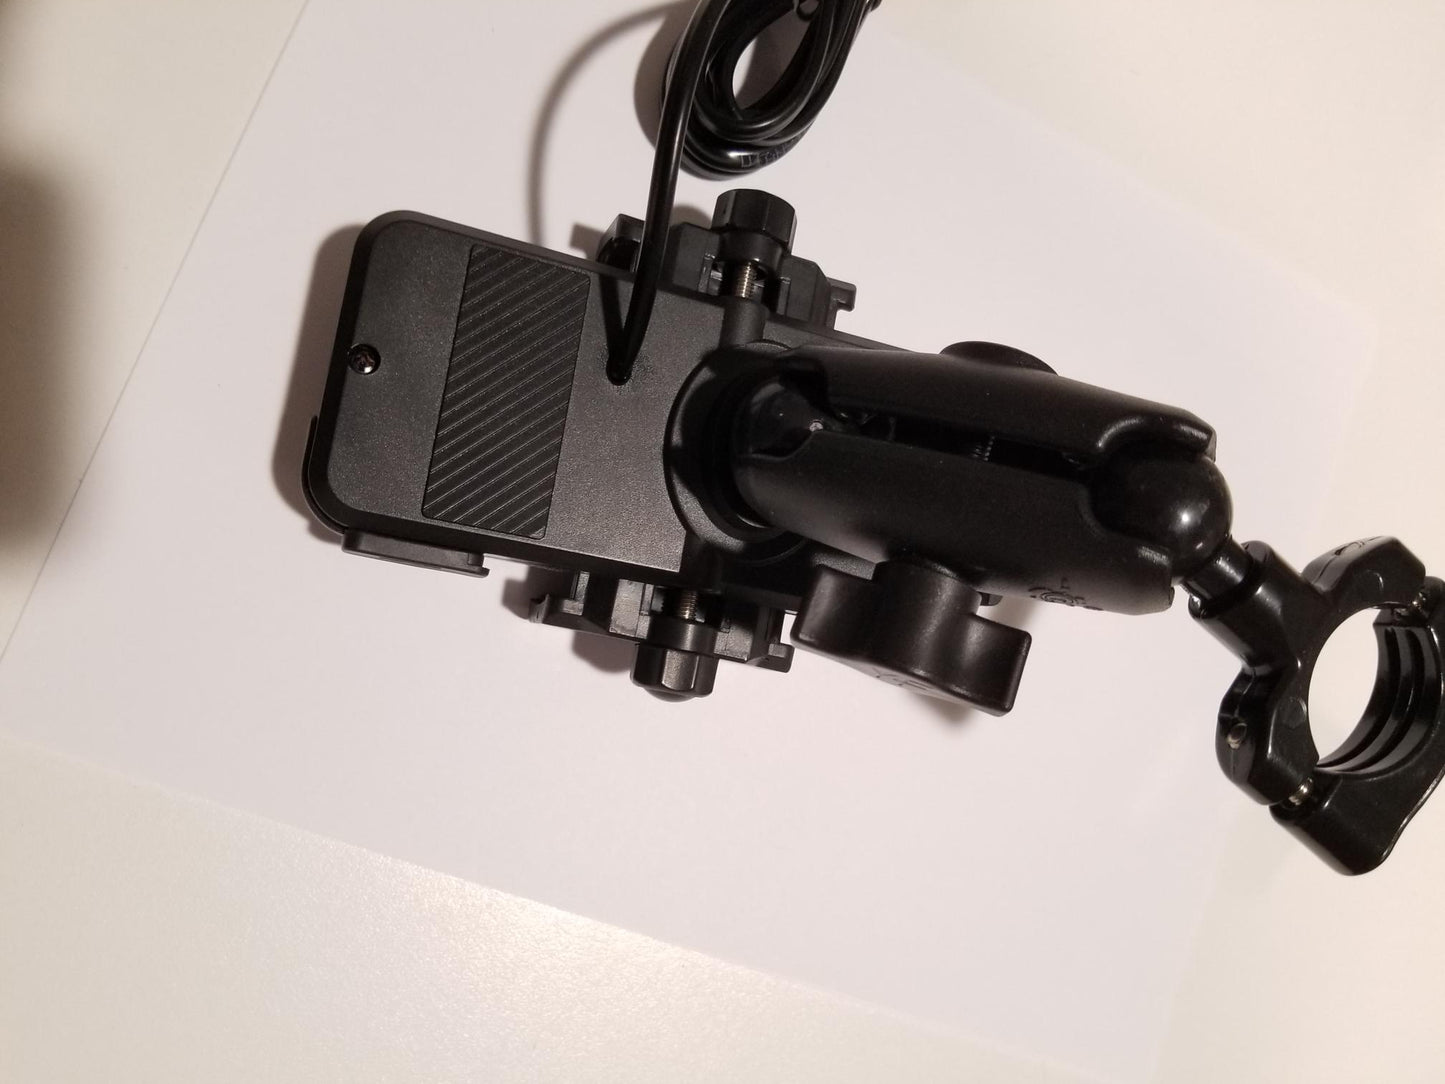 Phone mount with Inductive wireless charging with articulating ball mounting system